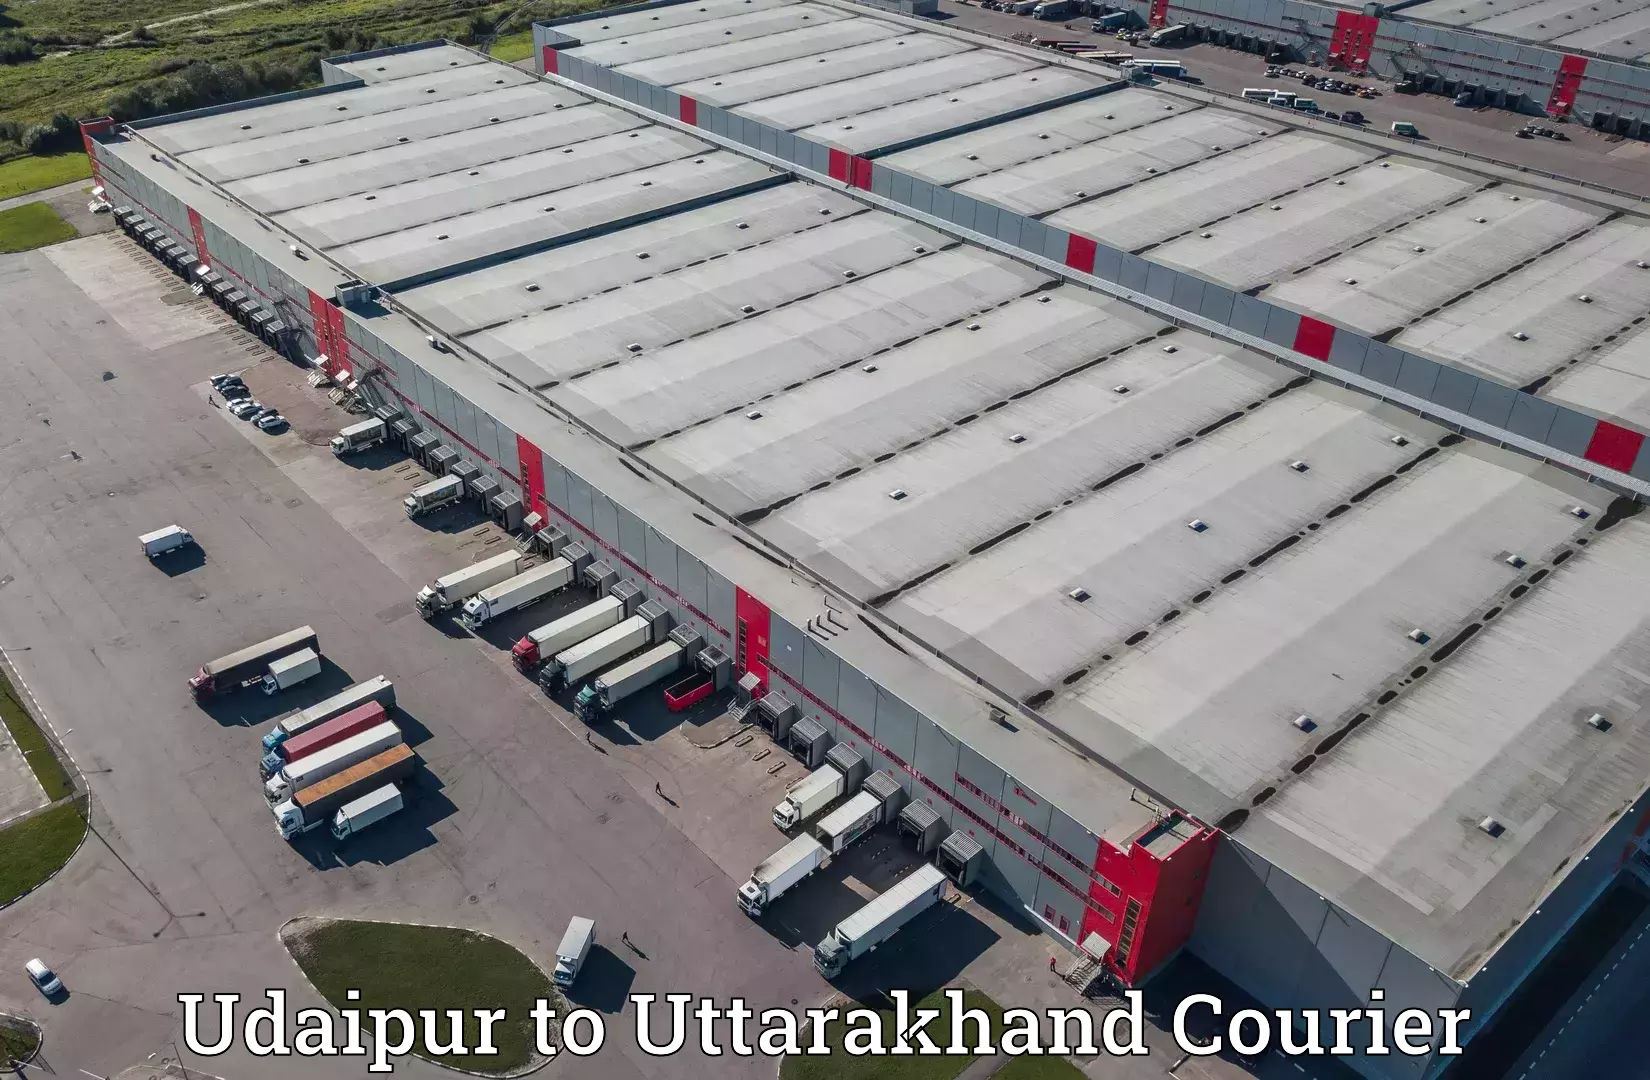 Sustainable shipping practices Udaipur to Pithoragarh